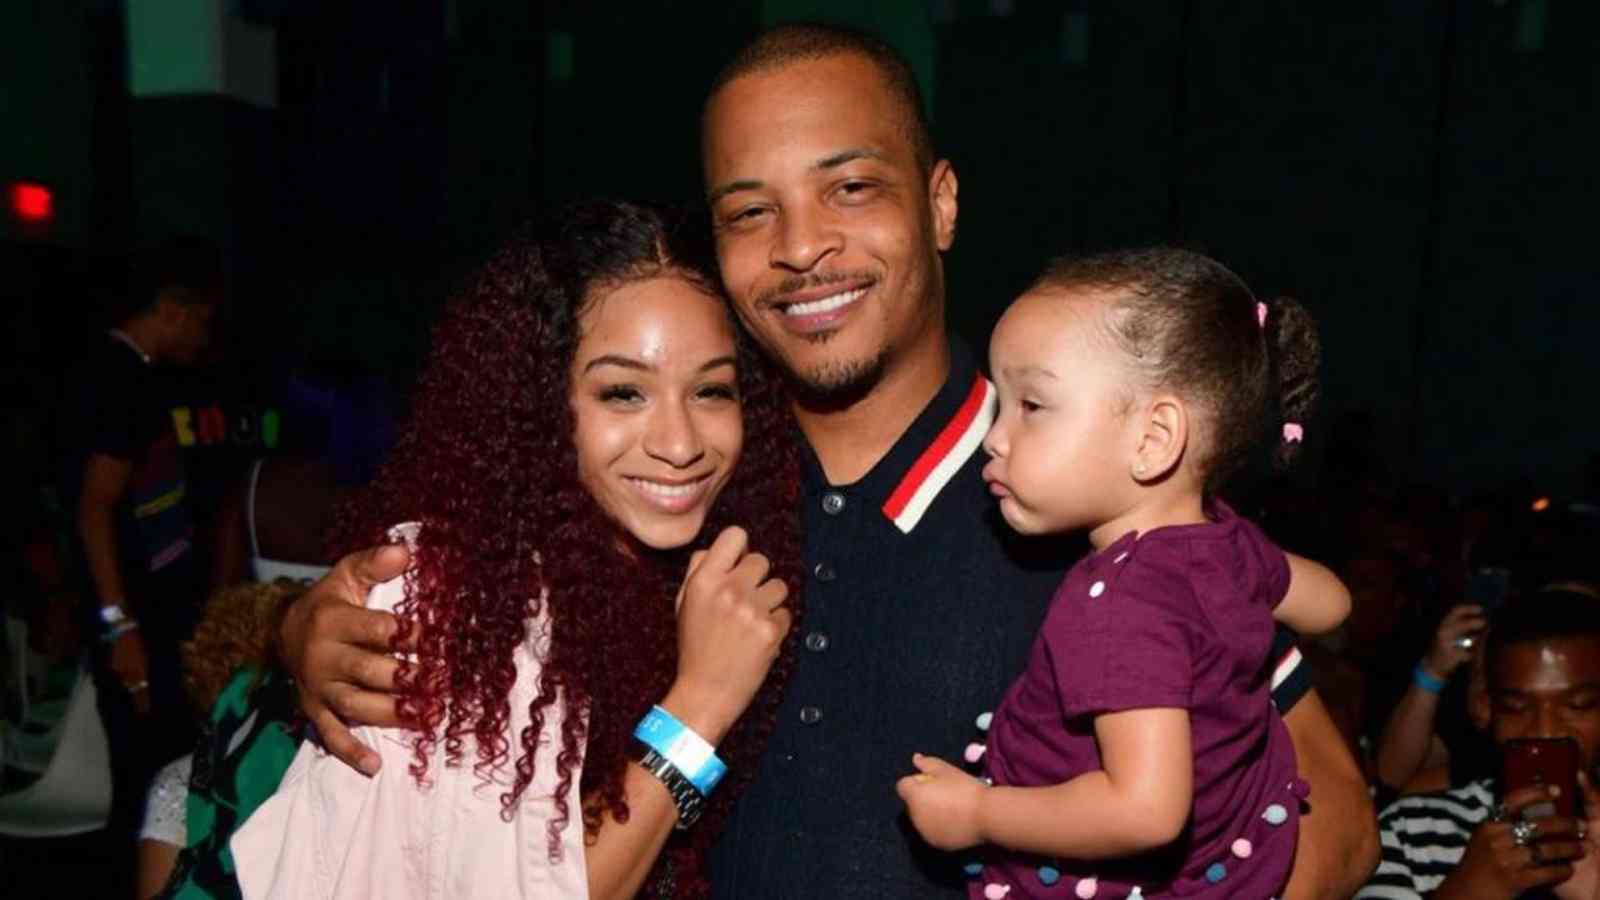 T.I. got his underaged daughter's hymen checked to ensure she is a virgin